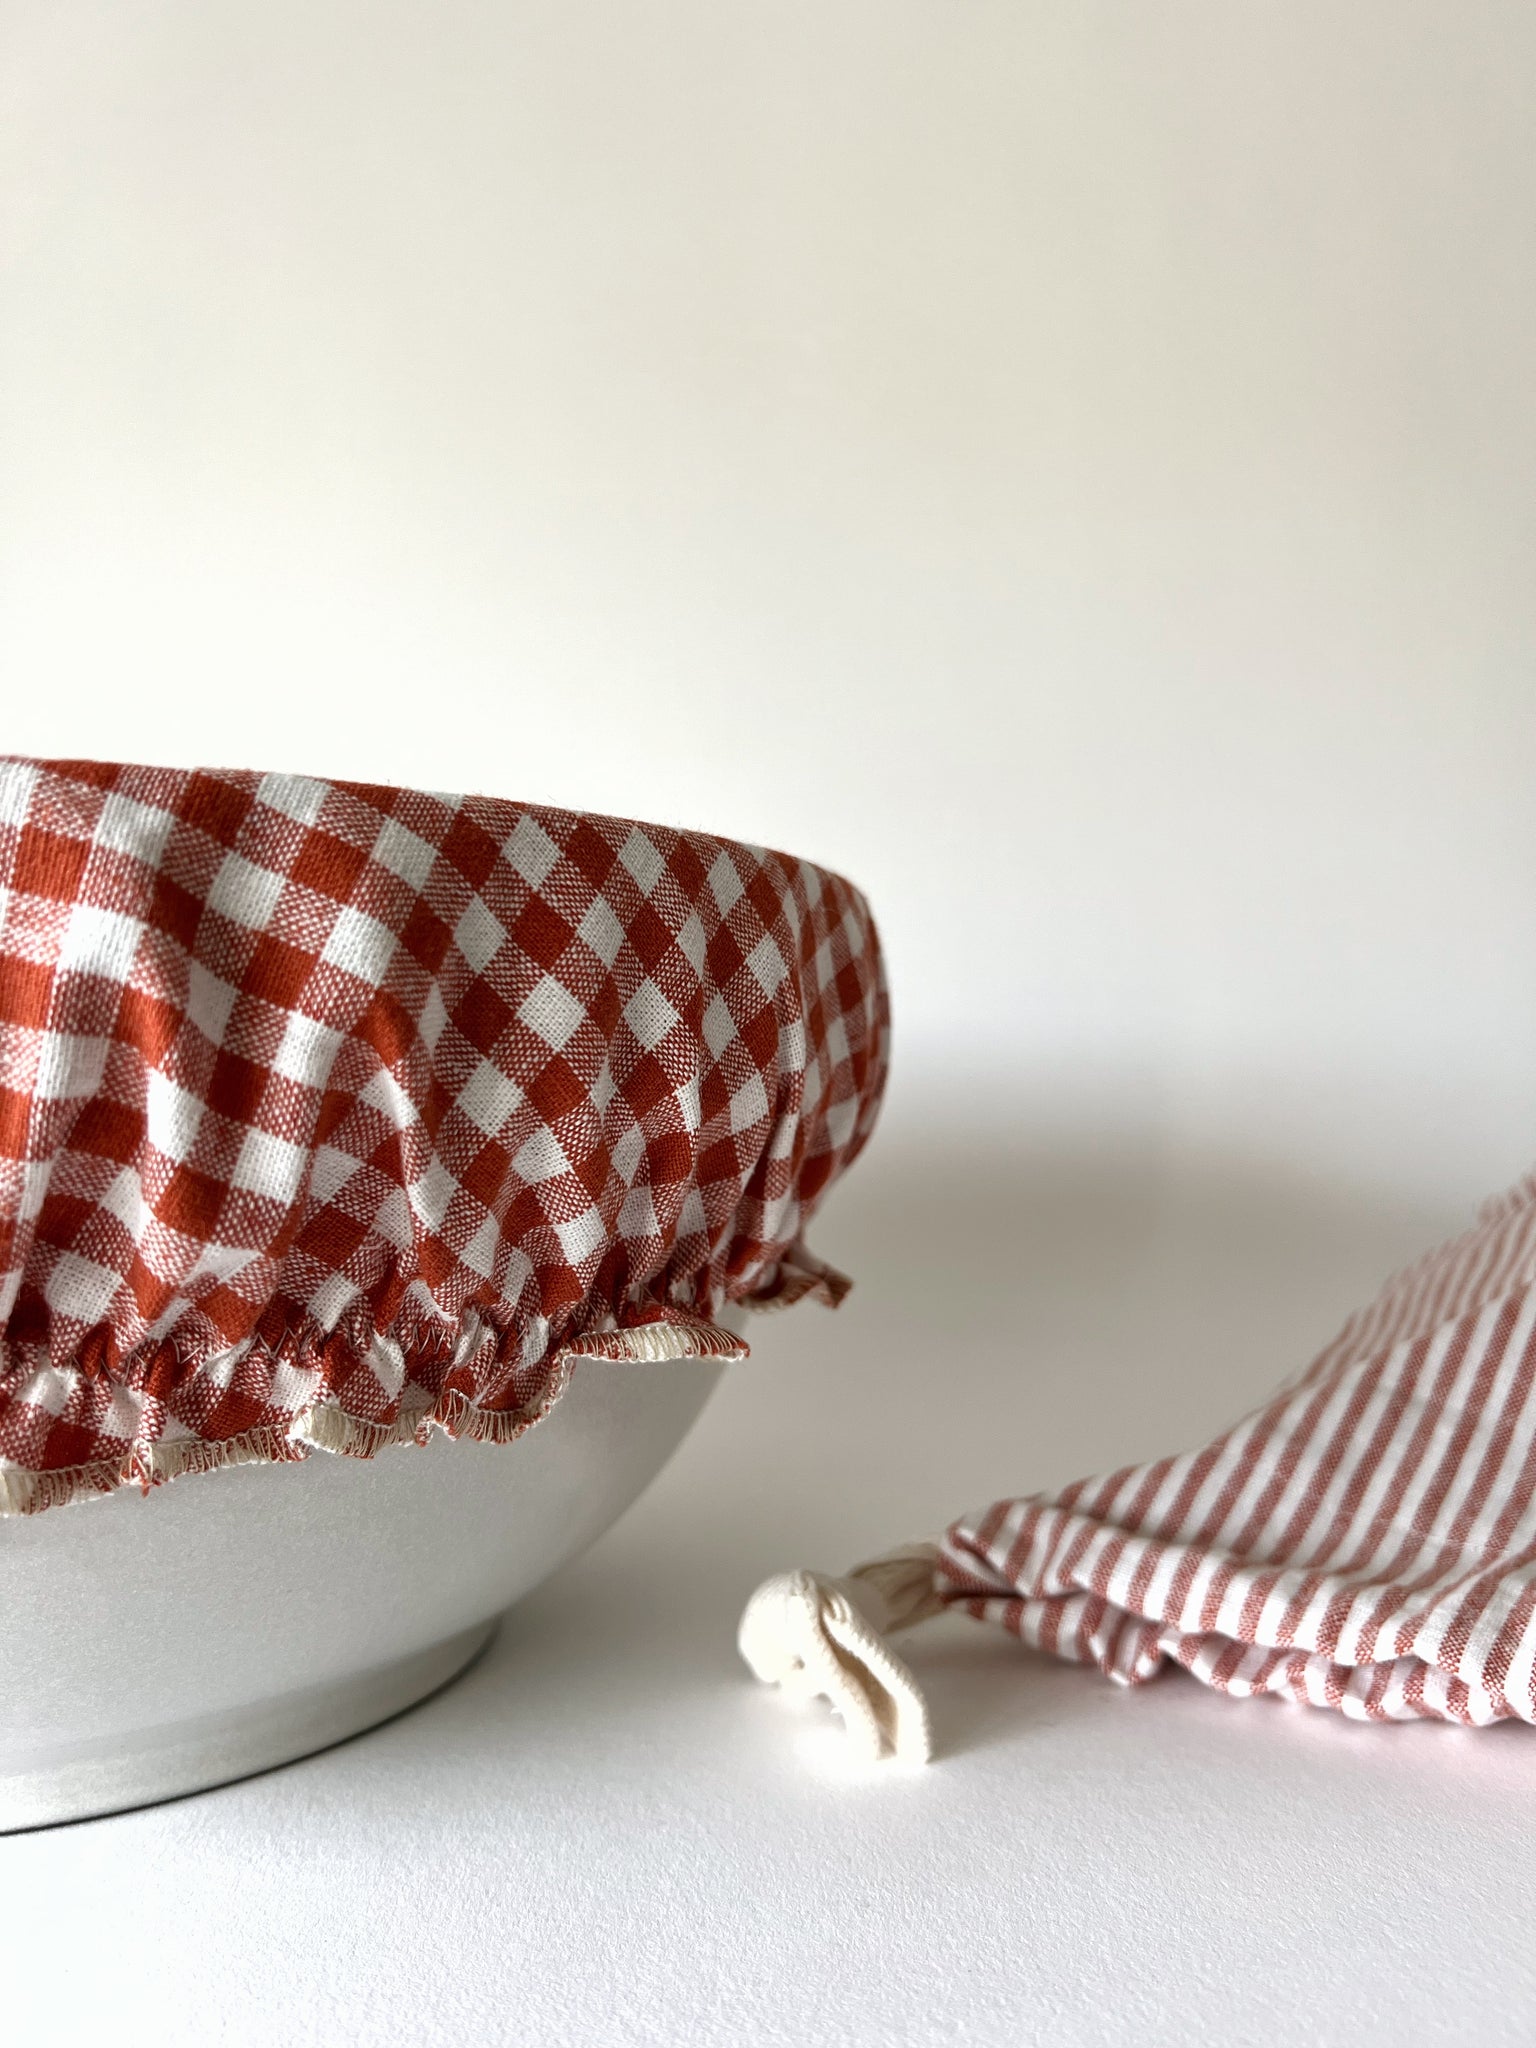 Handmade Bread Bag and Bowl Cover